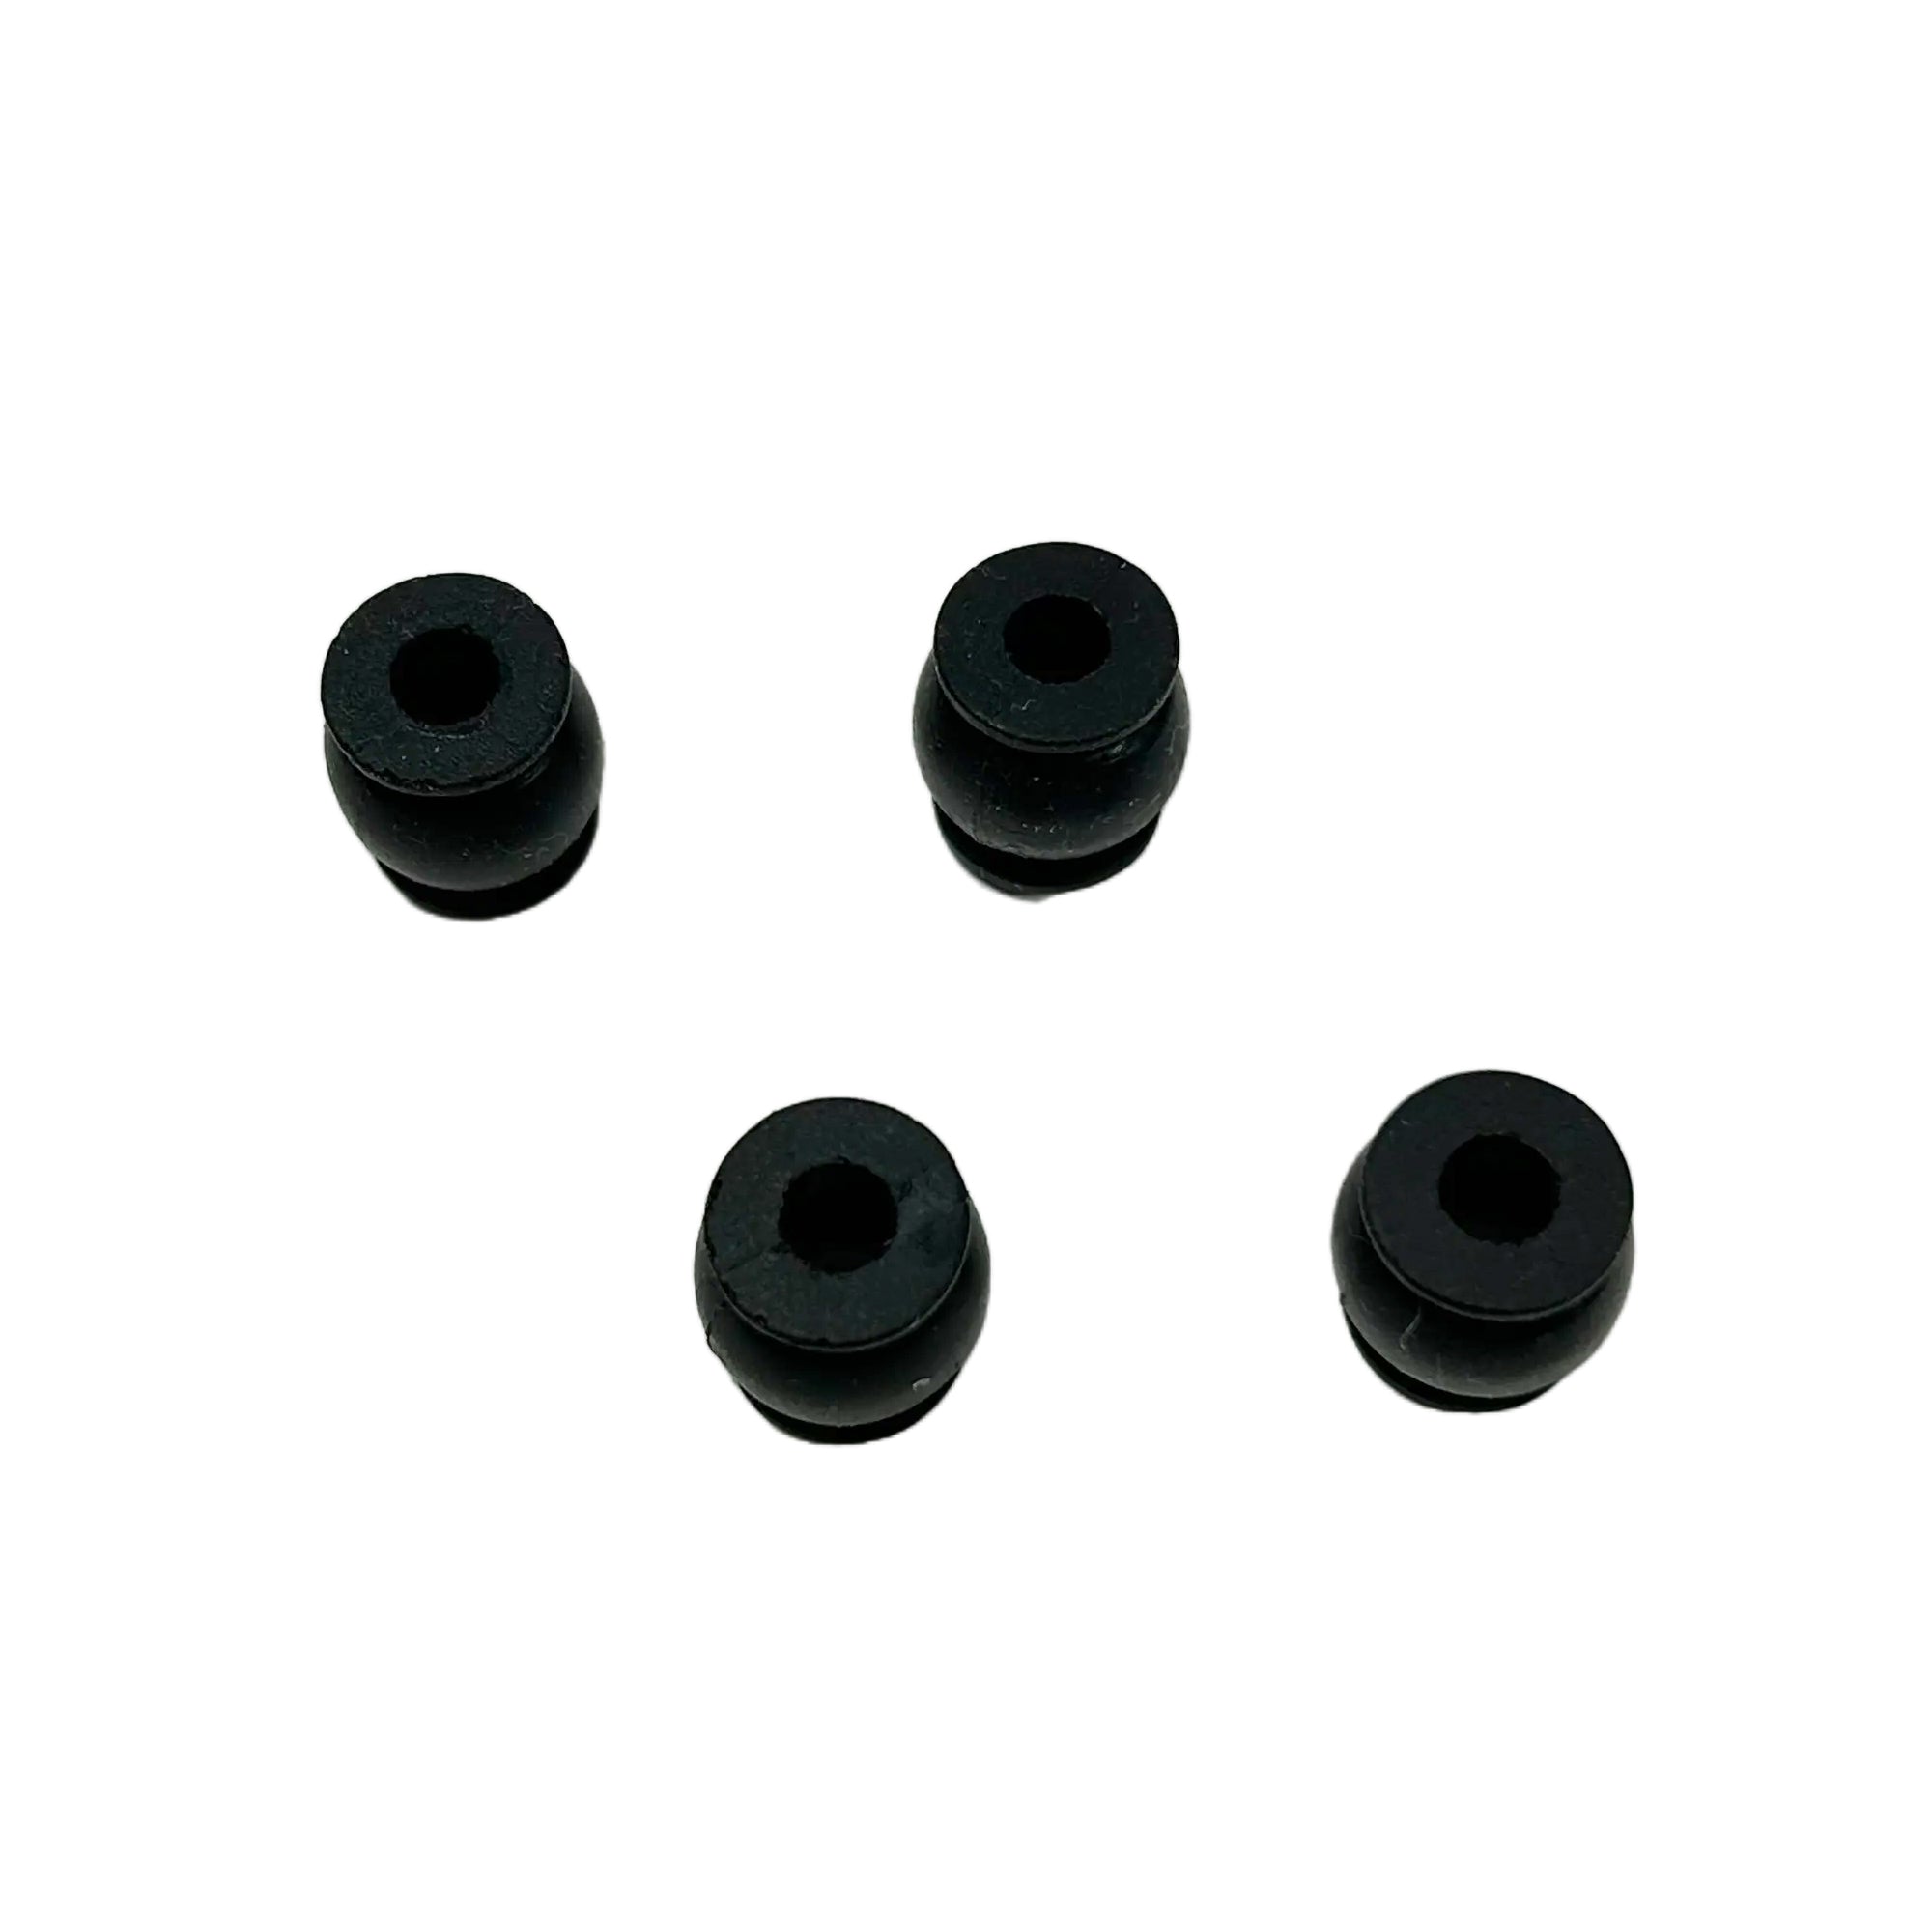 CGO3 Top Mount Drone Repair Parts for Yuneec Q500 Drone Only